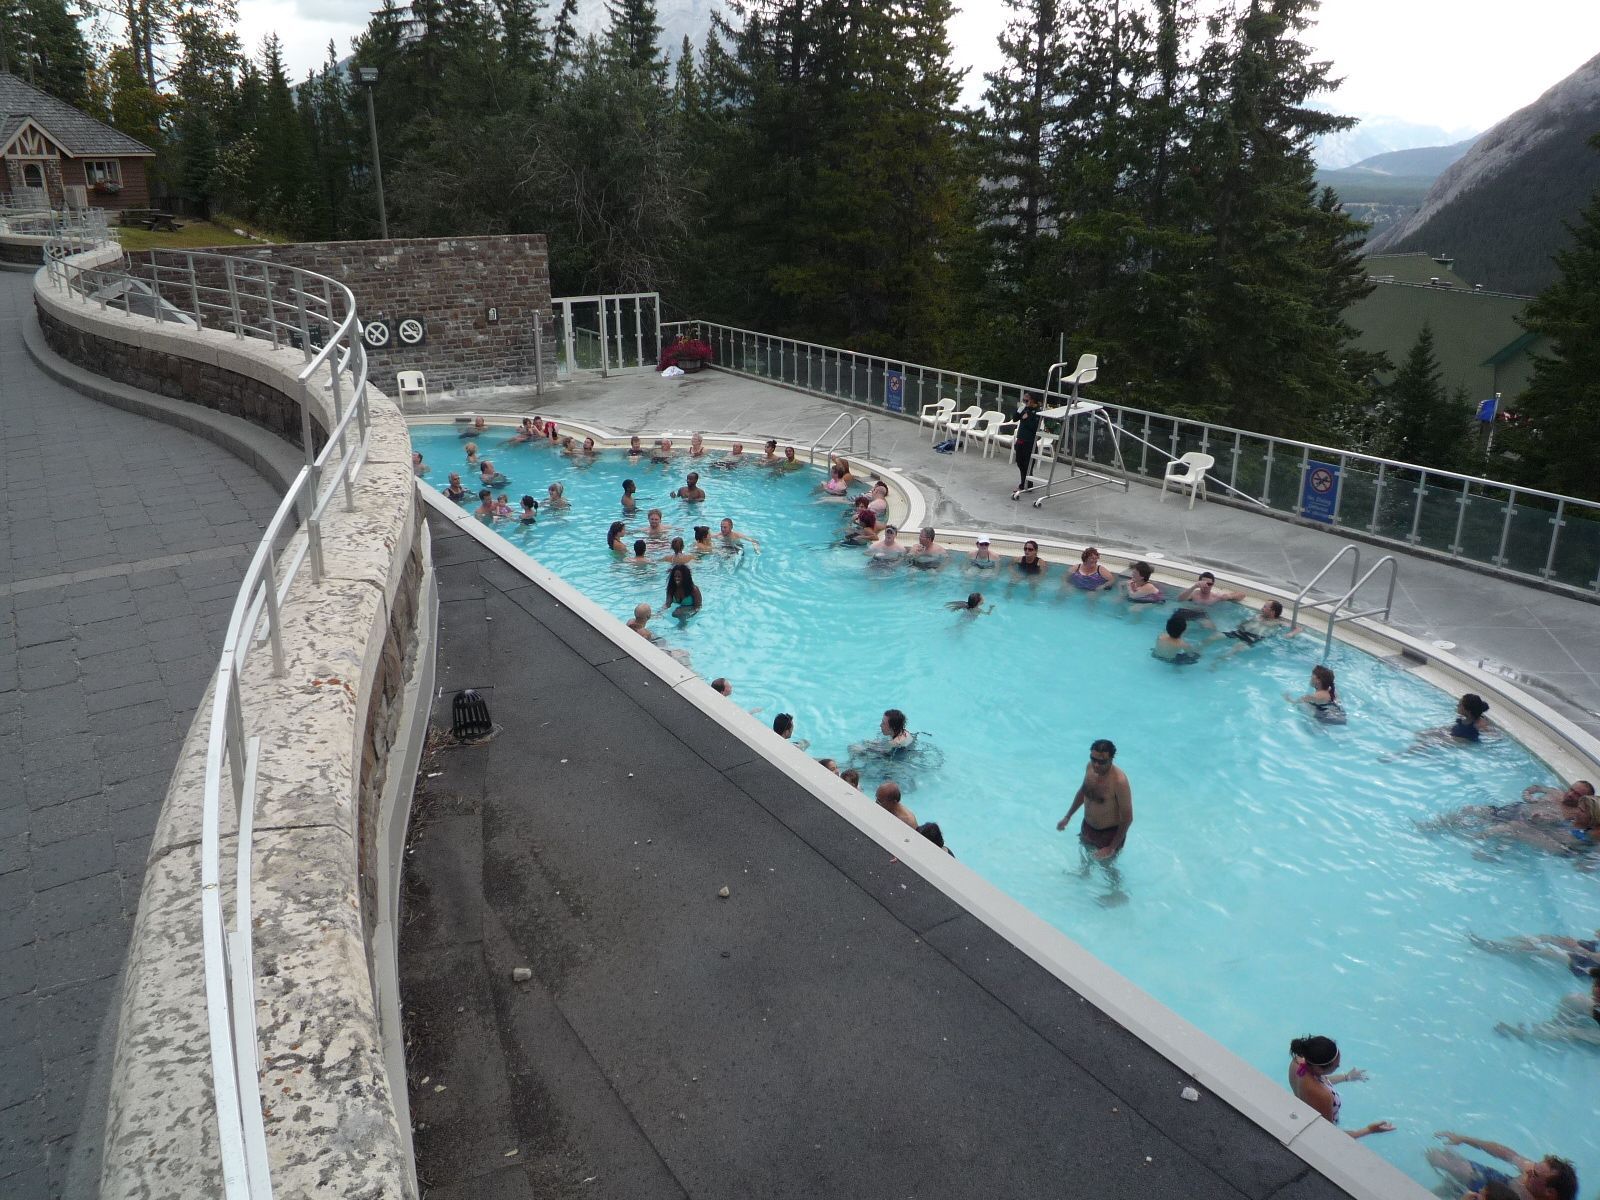 <p>For those who have been to popular hot springs in Canada like the naturally-formed <a href="https://www.sloquethotsprings.ca/">Sloquet Hot Springs</a> and Tofino’s mineral pools in <a href="https://bcparks.ca/maquinna-marine-park/">Maquinna Marine Provincial Park</a>, <a href="https://hotsprings.ca/banff/">Banff Upper Hot Springs</a> is likely to disappoint. The price may be right, but these hot springs are more like a set of jacuzzis against the backdrop of the country’s most dramatic landscapes. Perhaps the views and atmosphere, rather than the hot springs themselves, are what draw so many tourists to this destination each year. Check out the natural hot springs listed above for the real spa experience. </p>